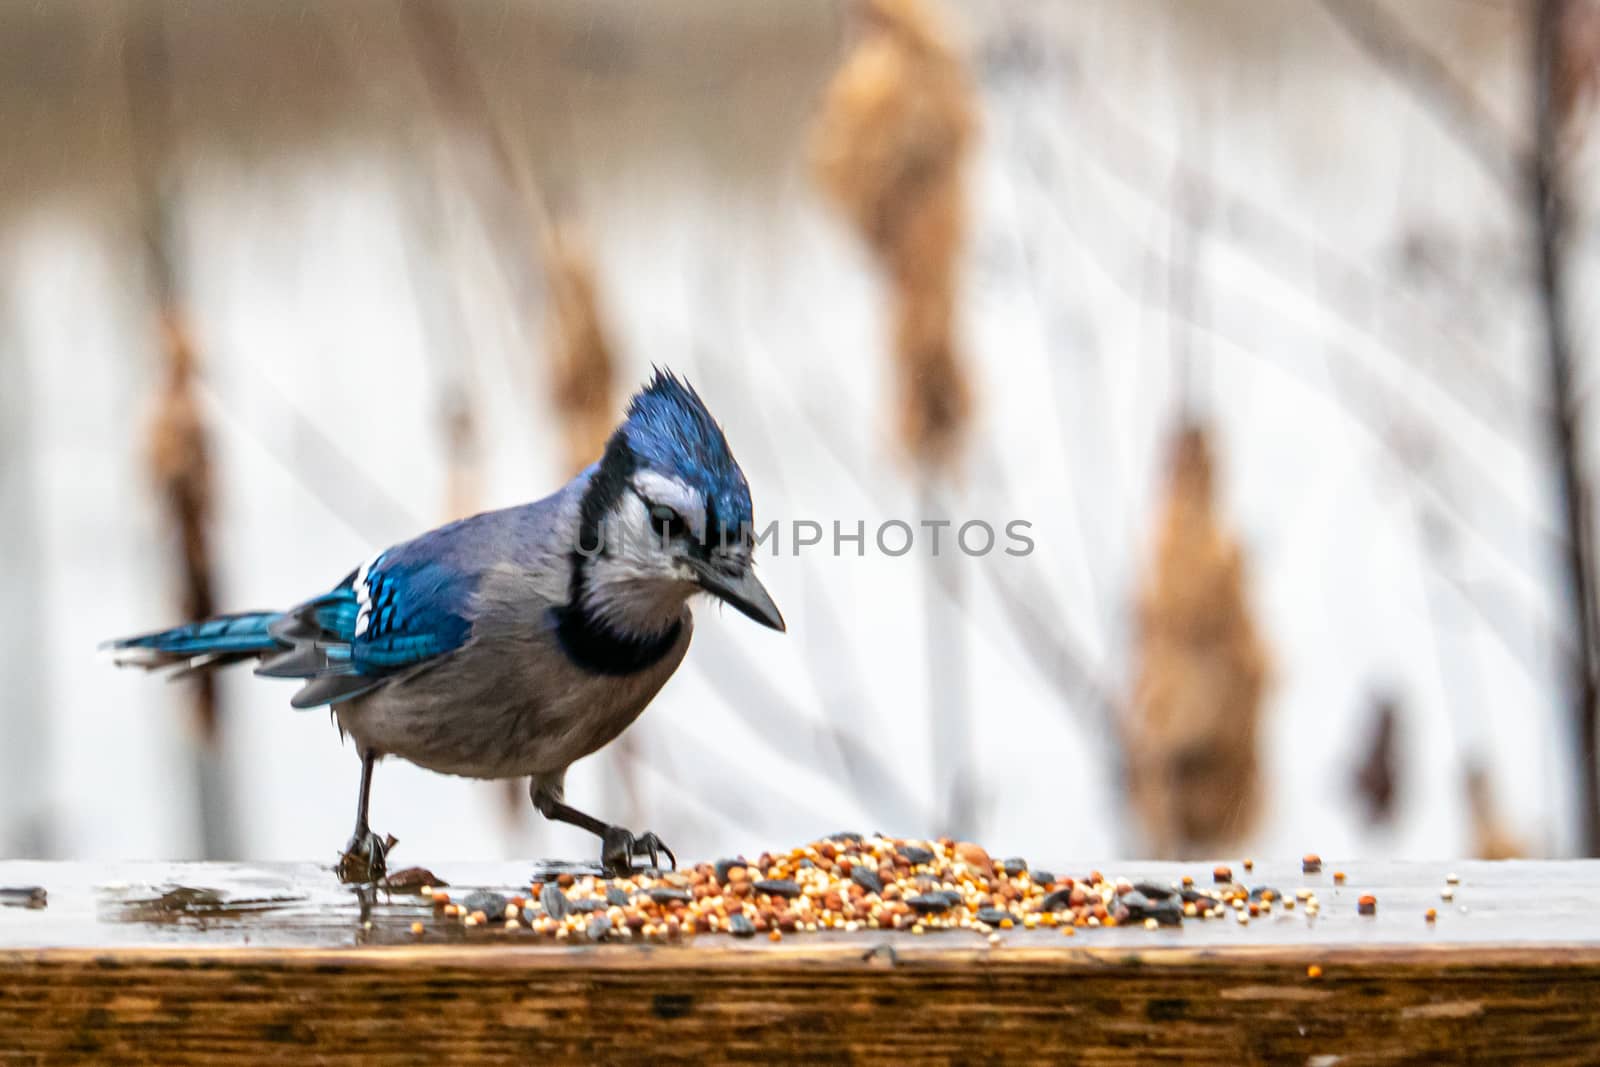 Wet Blue Jay Inspects Bird Seed Scattered on Wood by colintemple